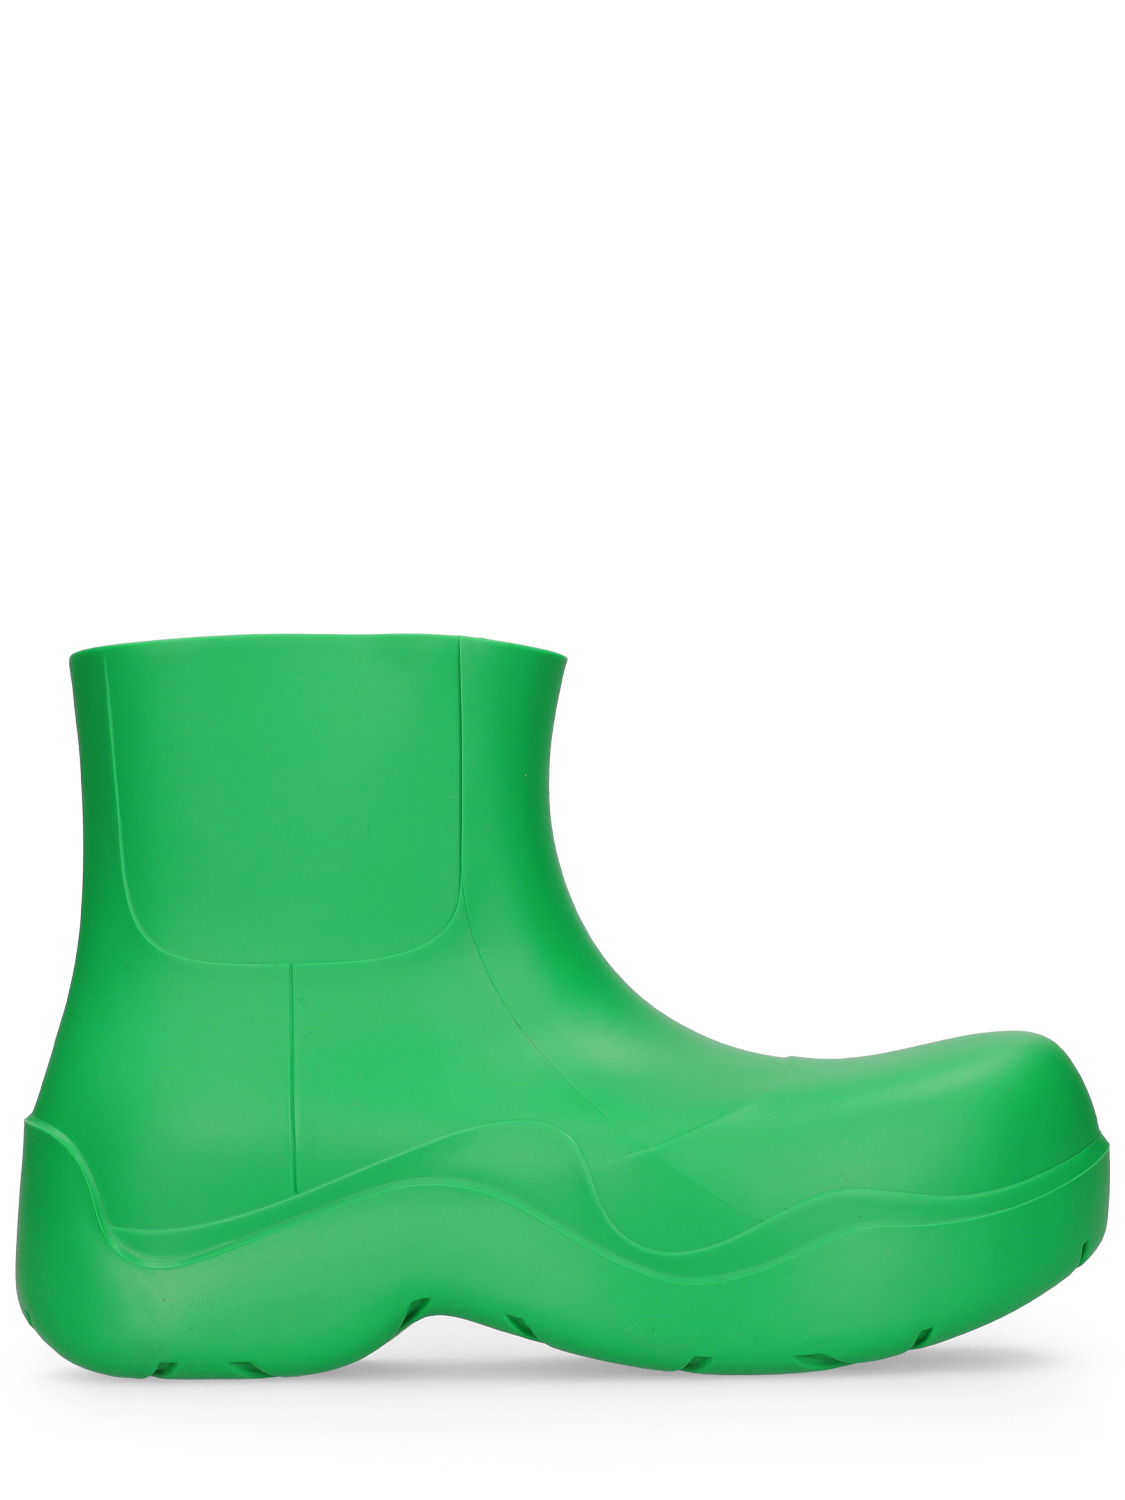 55mm Puddle Molded Rubber Ankle Boots